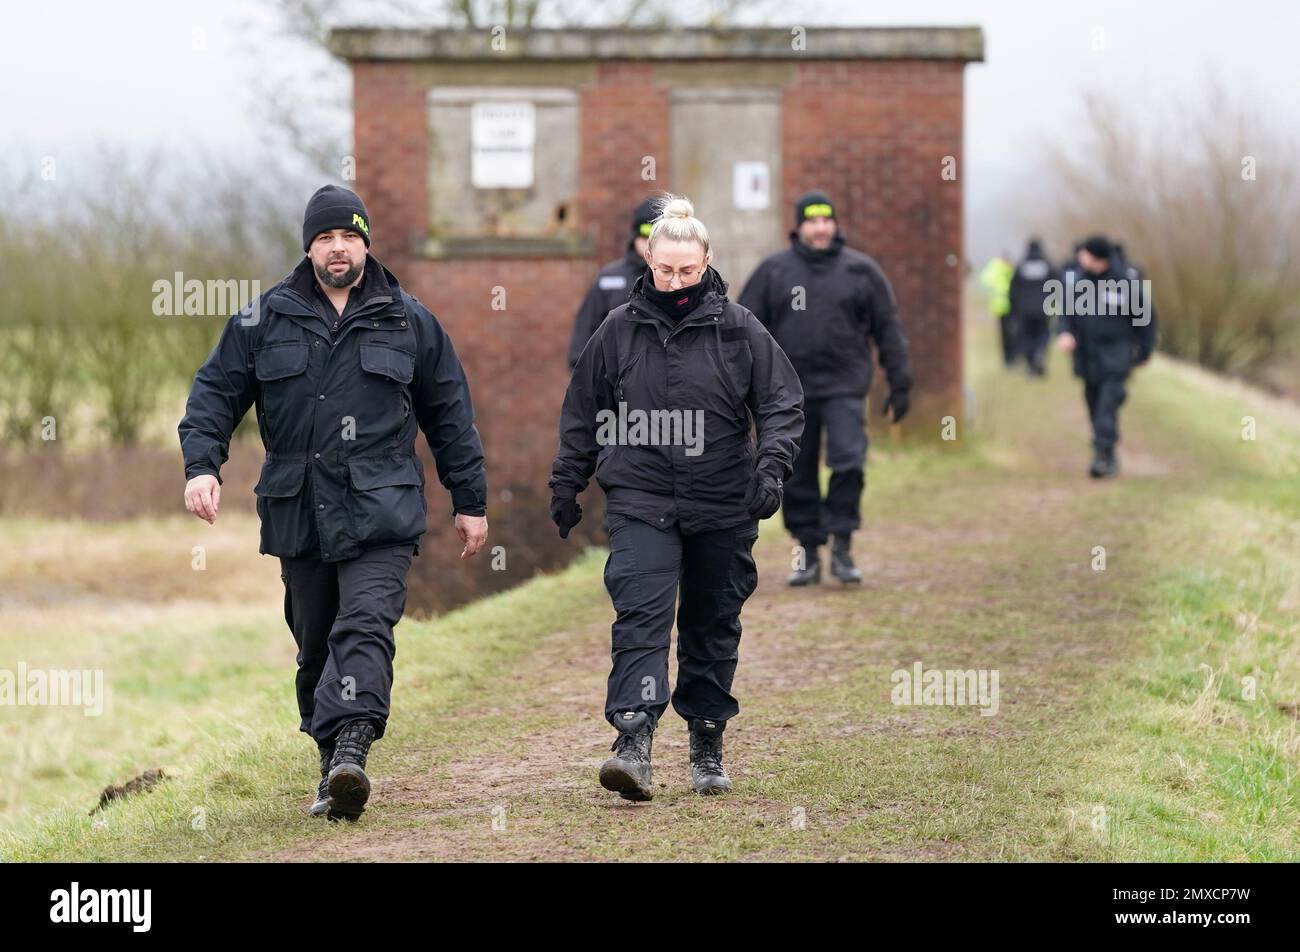 Police officers in St Michael's on Wyre, Lancashire, as police continue their search for missing woman Nicola Bulley, 45, who was last seen on the morning of Friday January 27, when she was spotted walking her dog on a footpath by the nearby River Wyre. Picture date: Friday February 3, 2023. Stock Photo